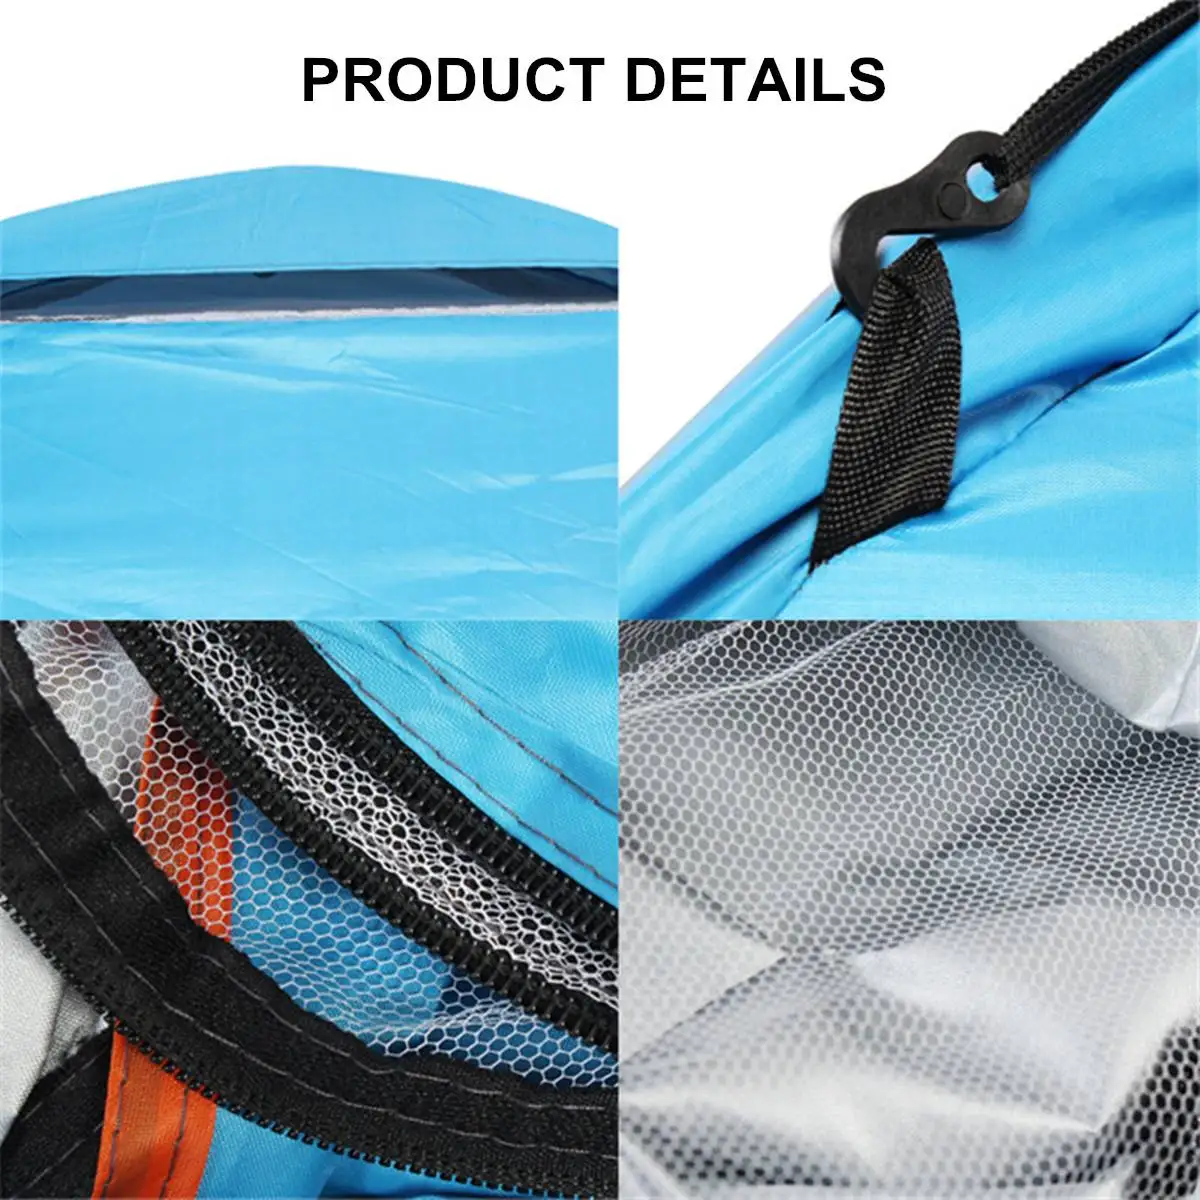 

Outdoor 1 2 3 Person Ultralight Tent Automatic Quick Open Camp Tents Waterproof Outdoor Camping Hiking Equipment for 3 Season